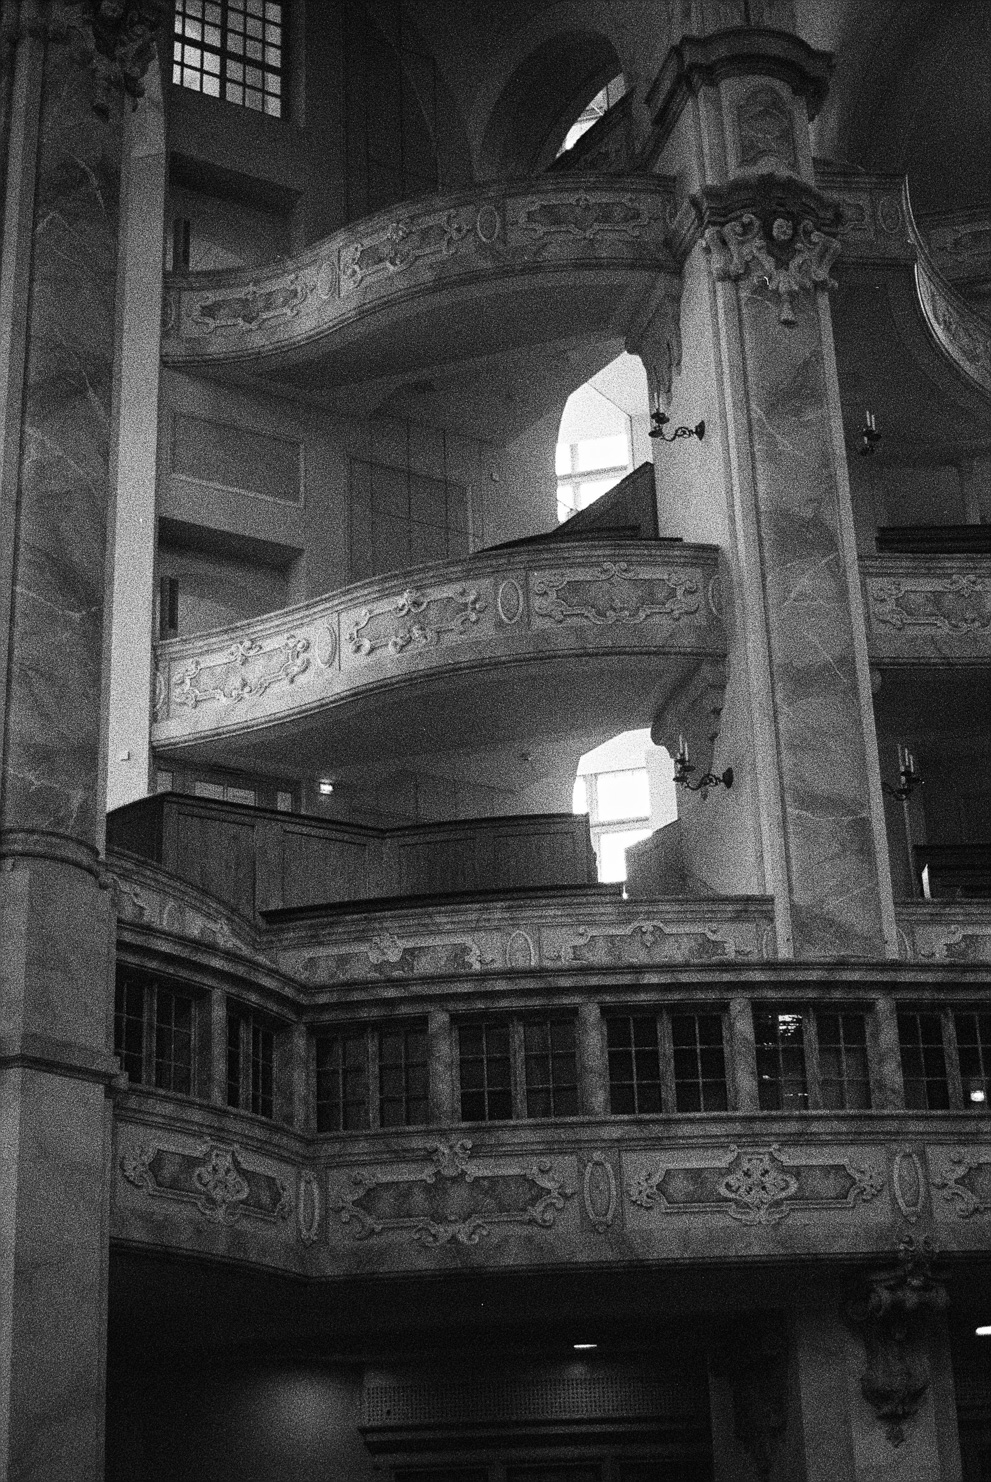 The galleries in the Church of Our Lady (Frauenkirche) in Dresden. Shot on Bergger Pancro 400.